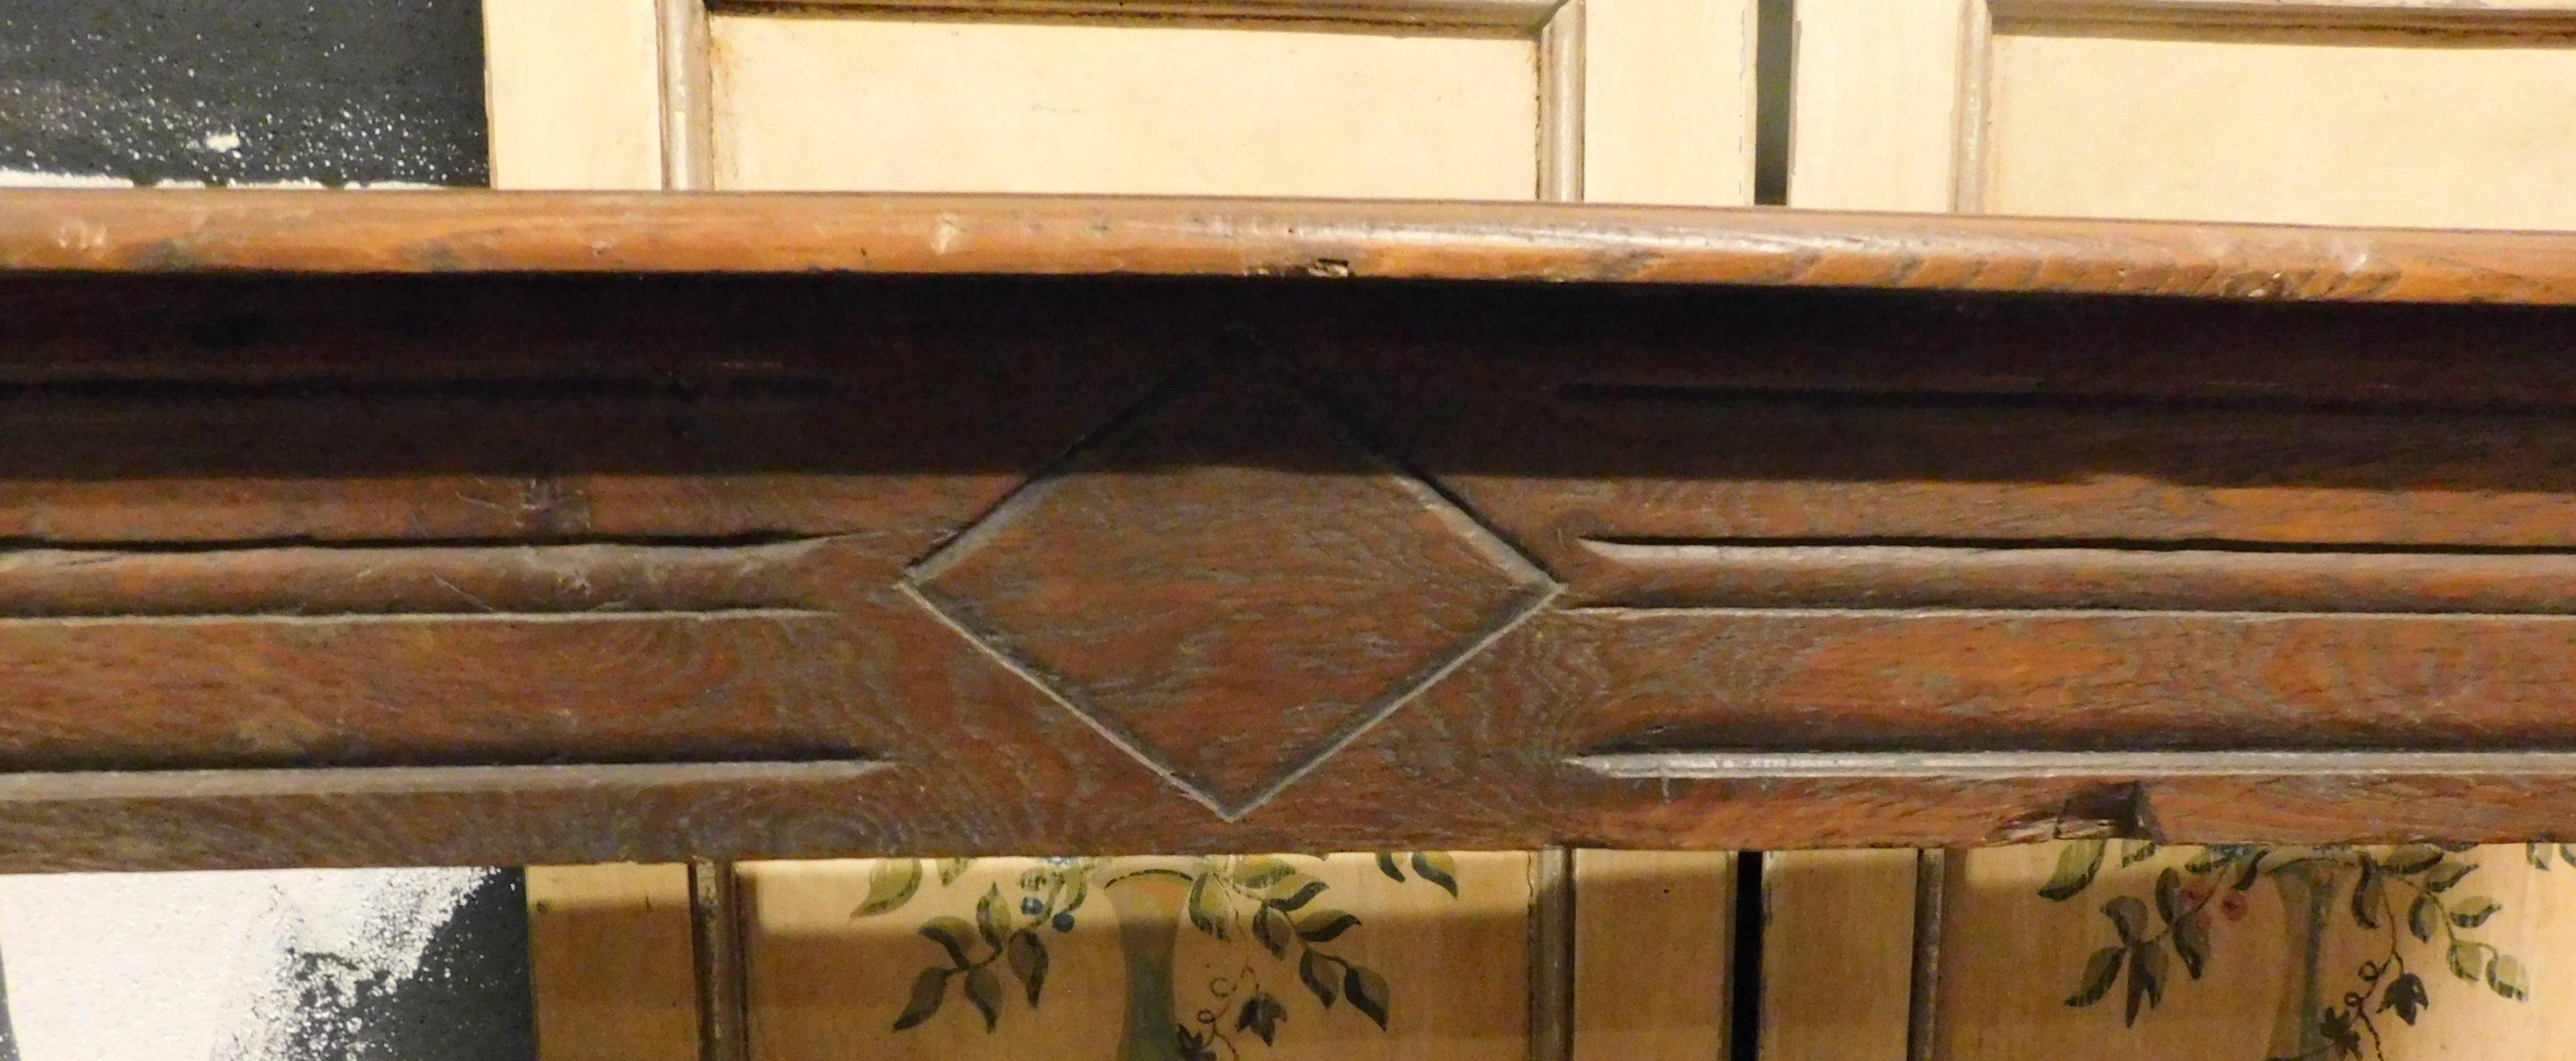 Hand-Carved Fireplace Mantel Frame Carved in Oak, 19th Century, France